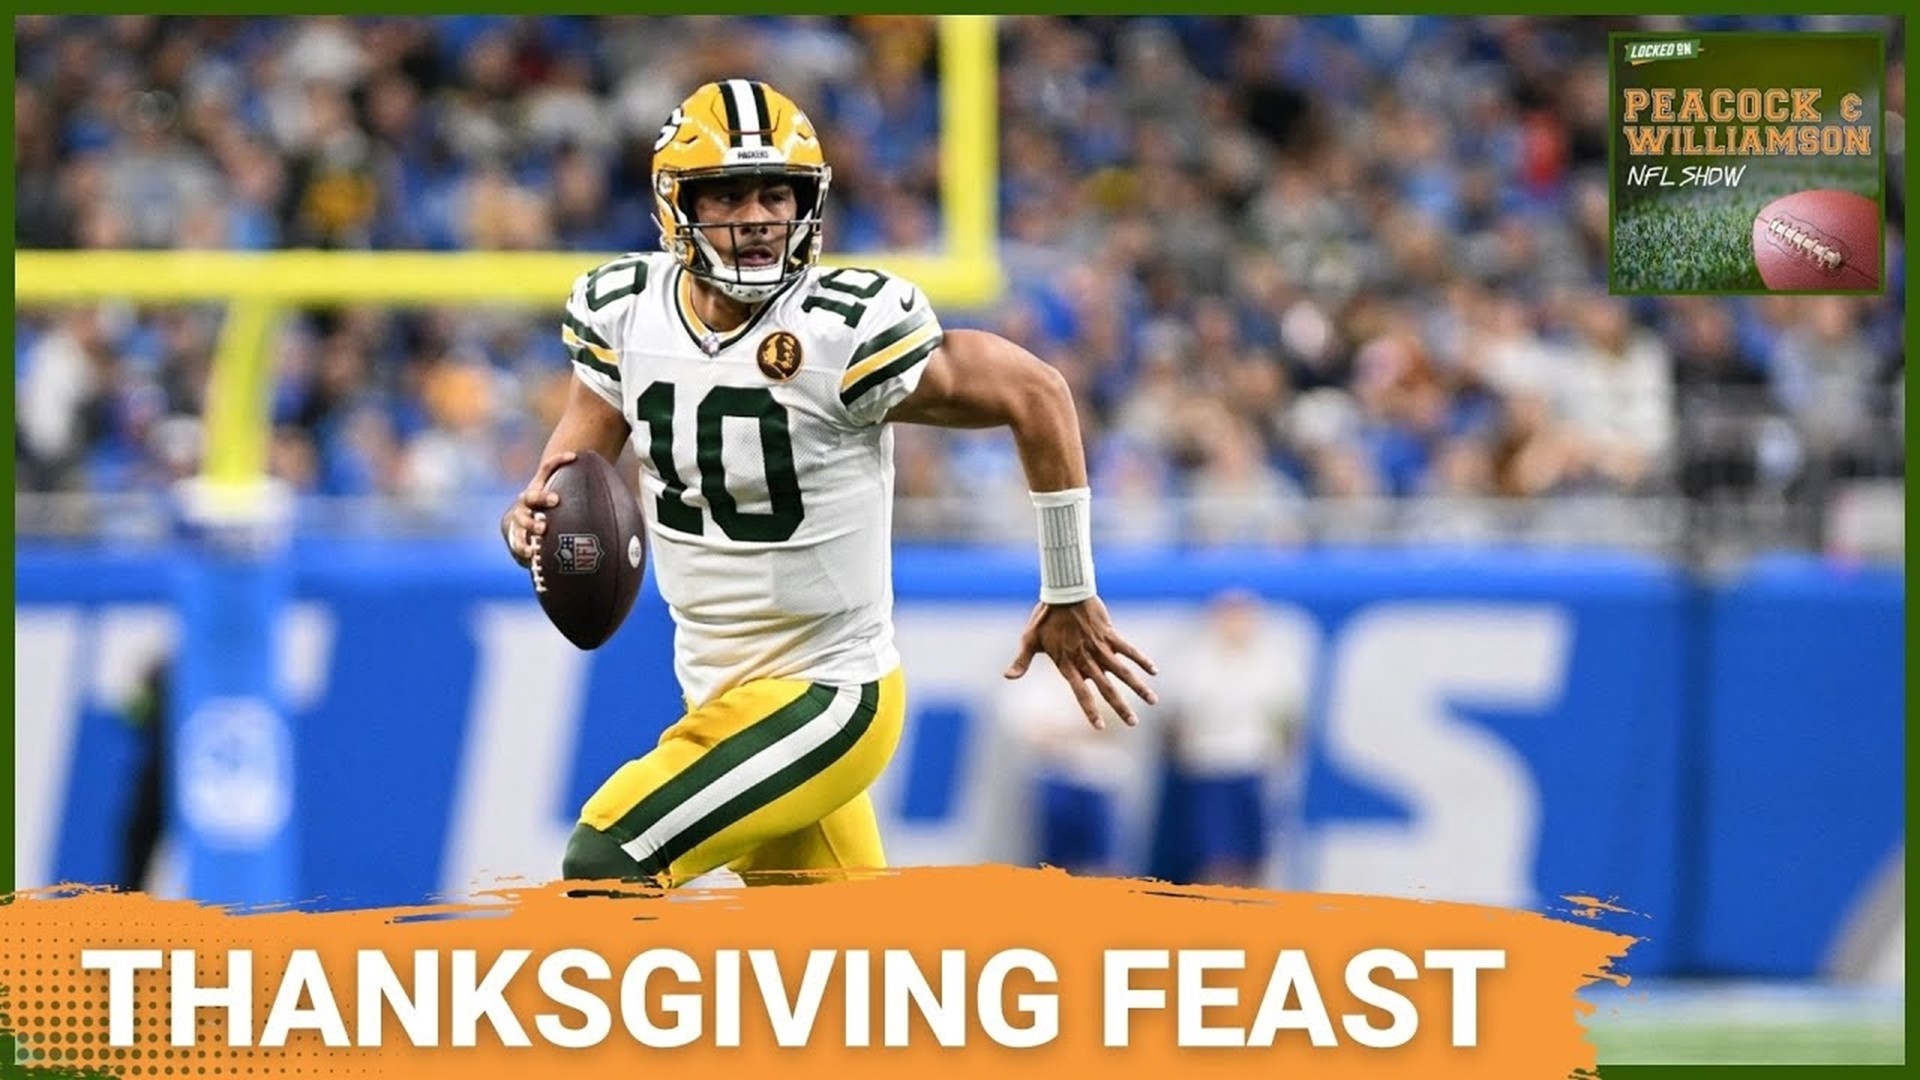 The Green Bay Packers are trying to climb back in the NFC playoff picture, beating the Detroit Lions on Thanksgiving.